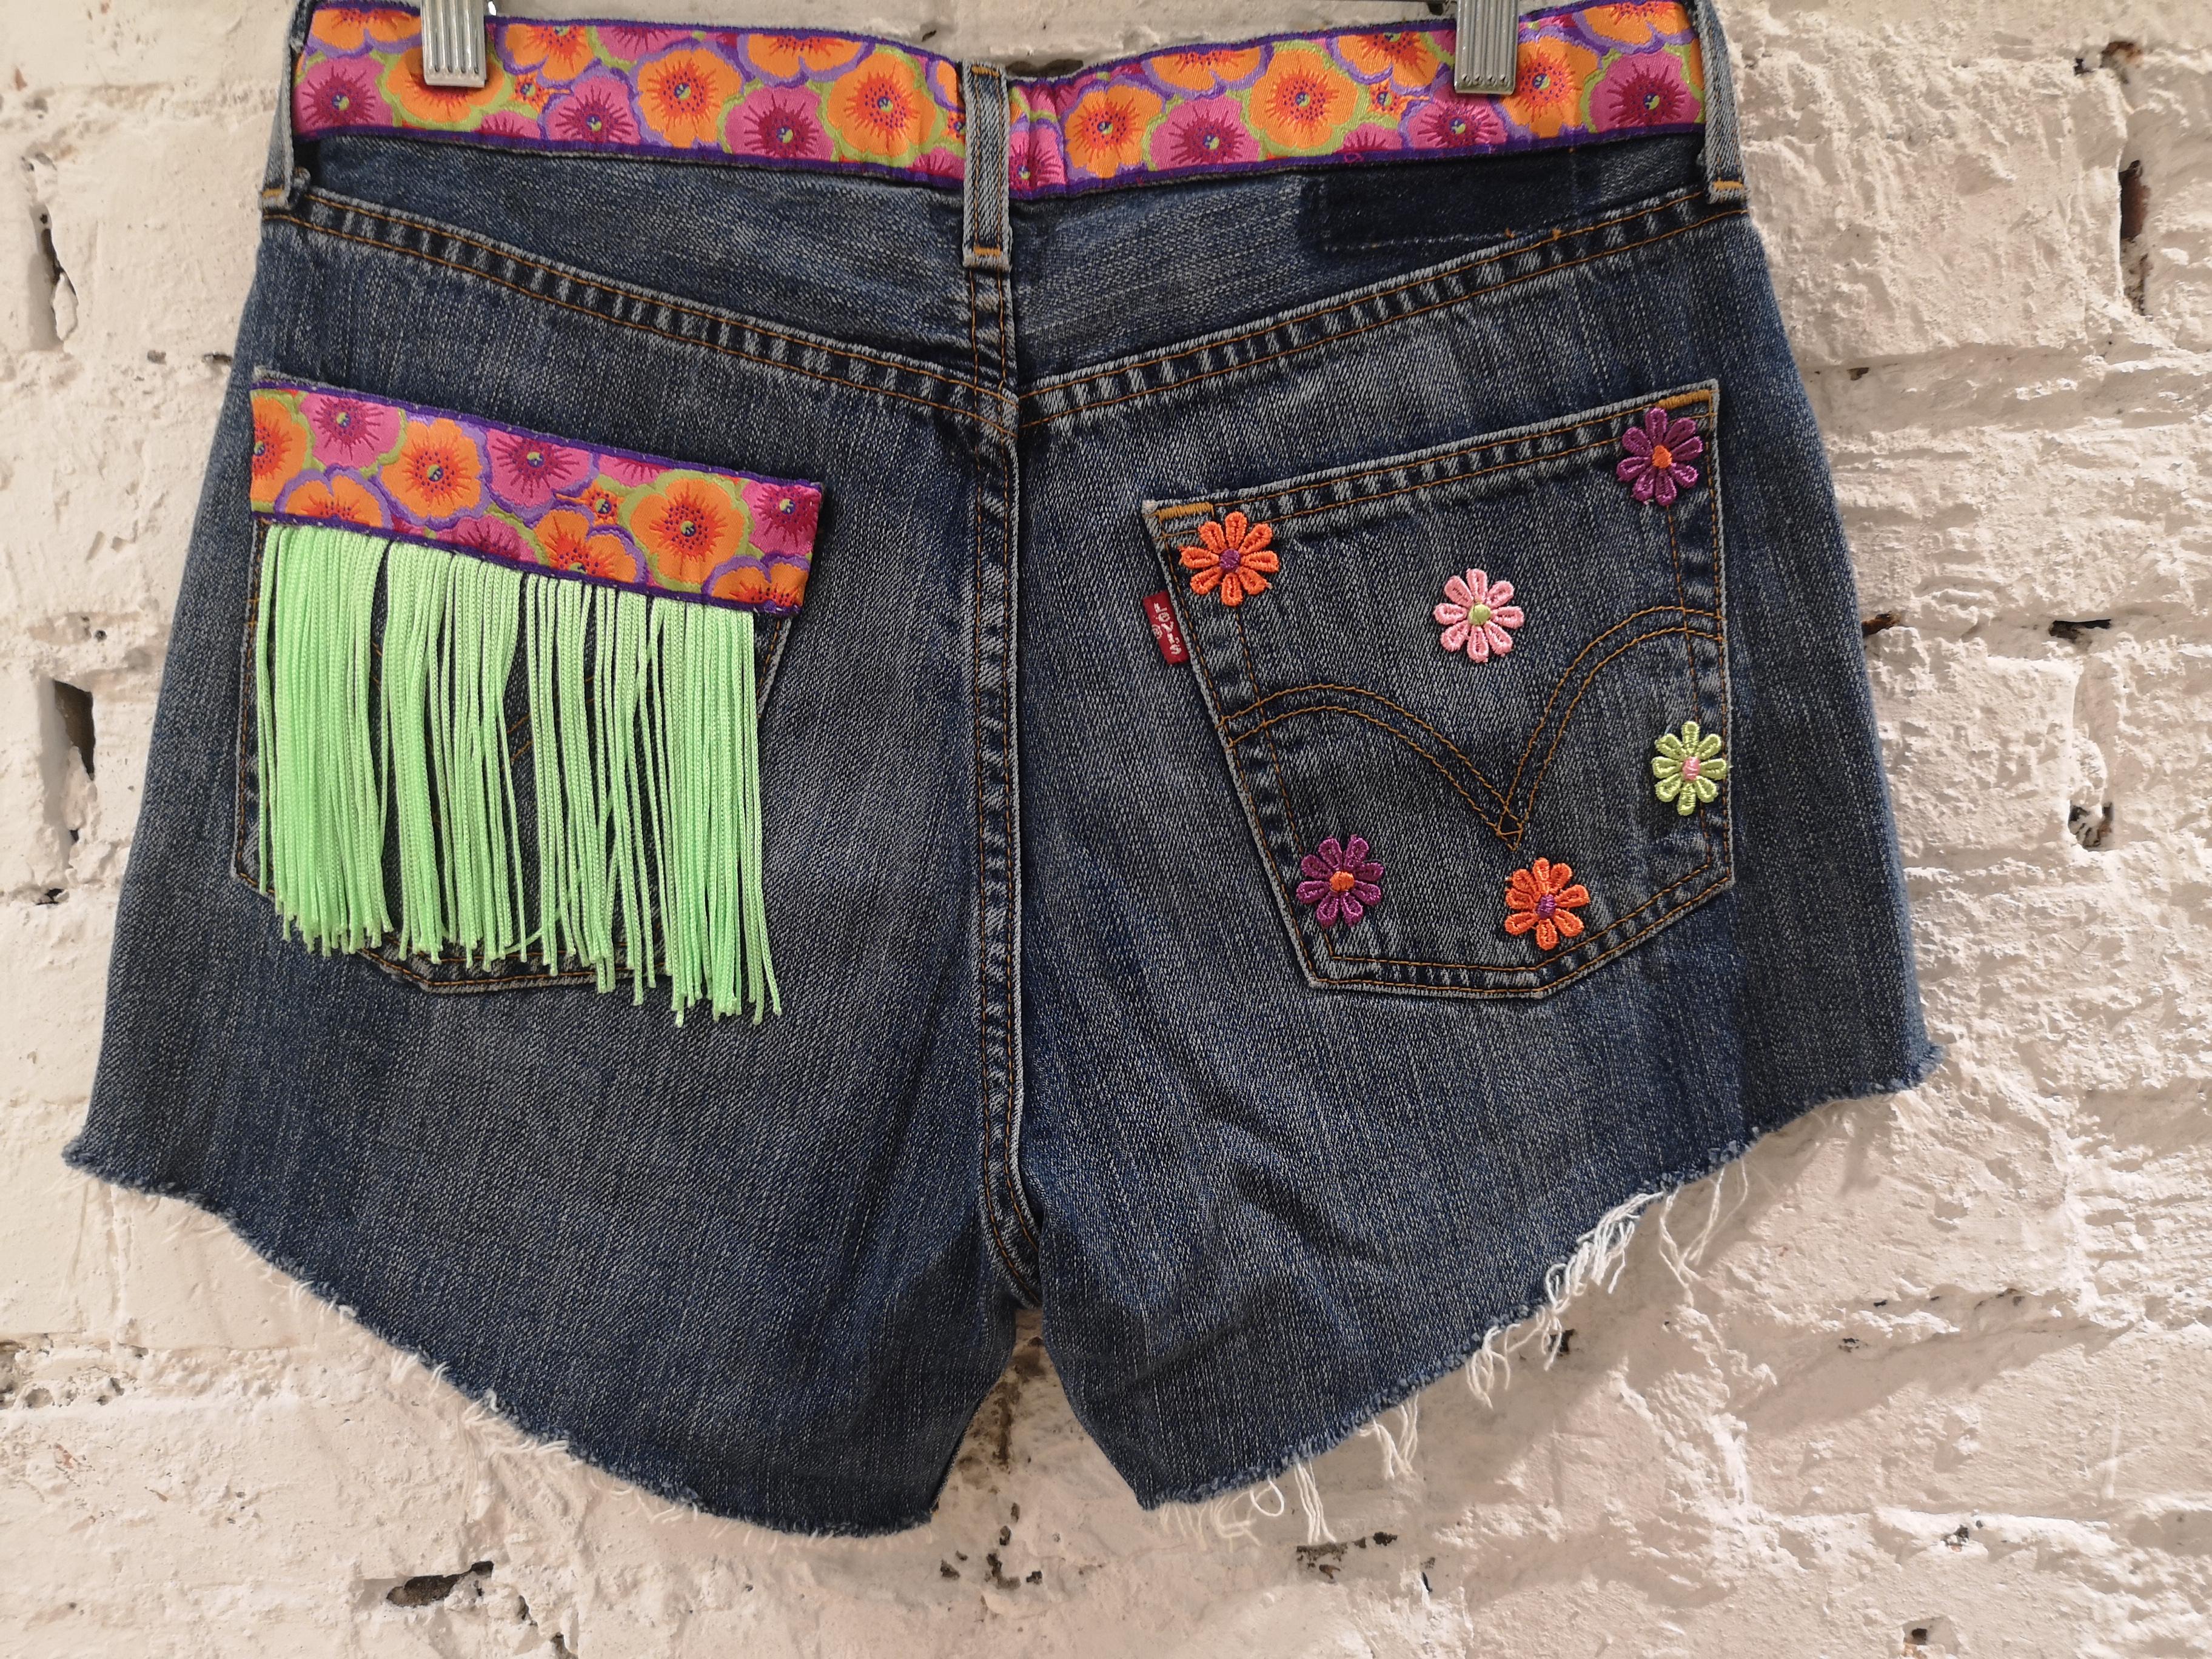 Blue denim SOAB shorts
vintage shorts recycled and customised totally handmade embellished with fringes and patterns all over
composition: cotton
total lenght 33 cm
waist 80 cm